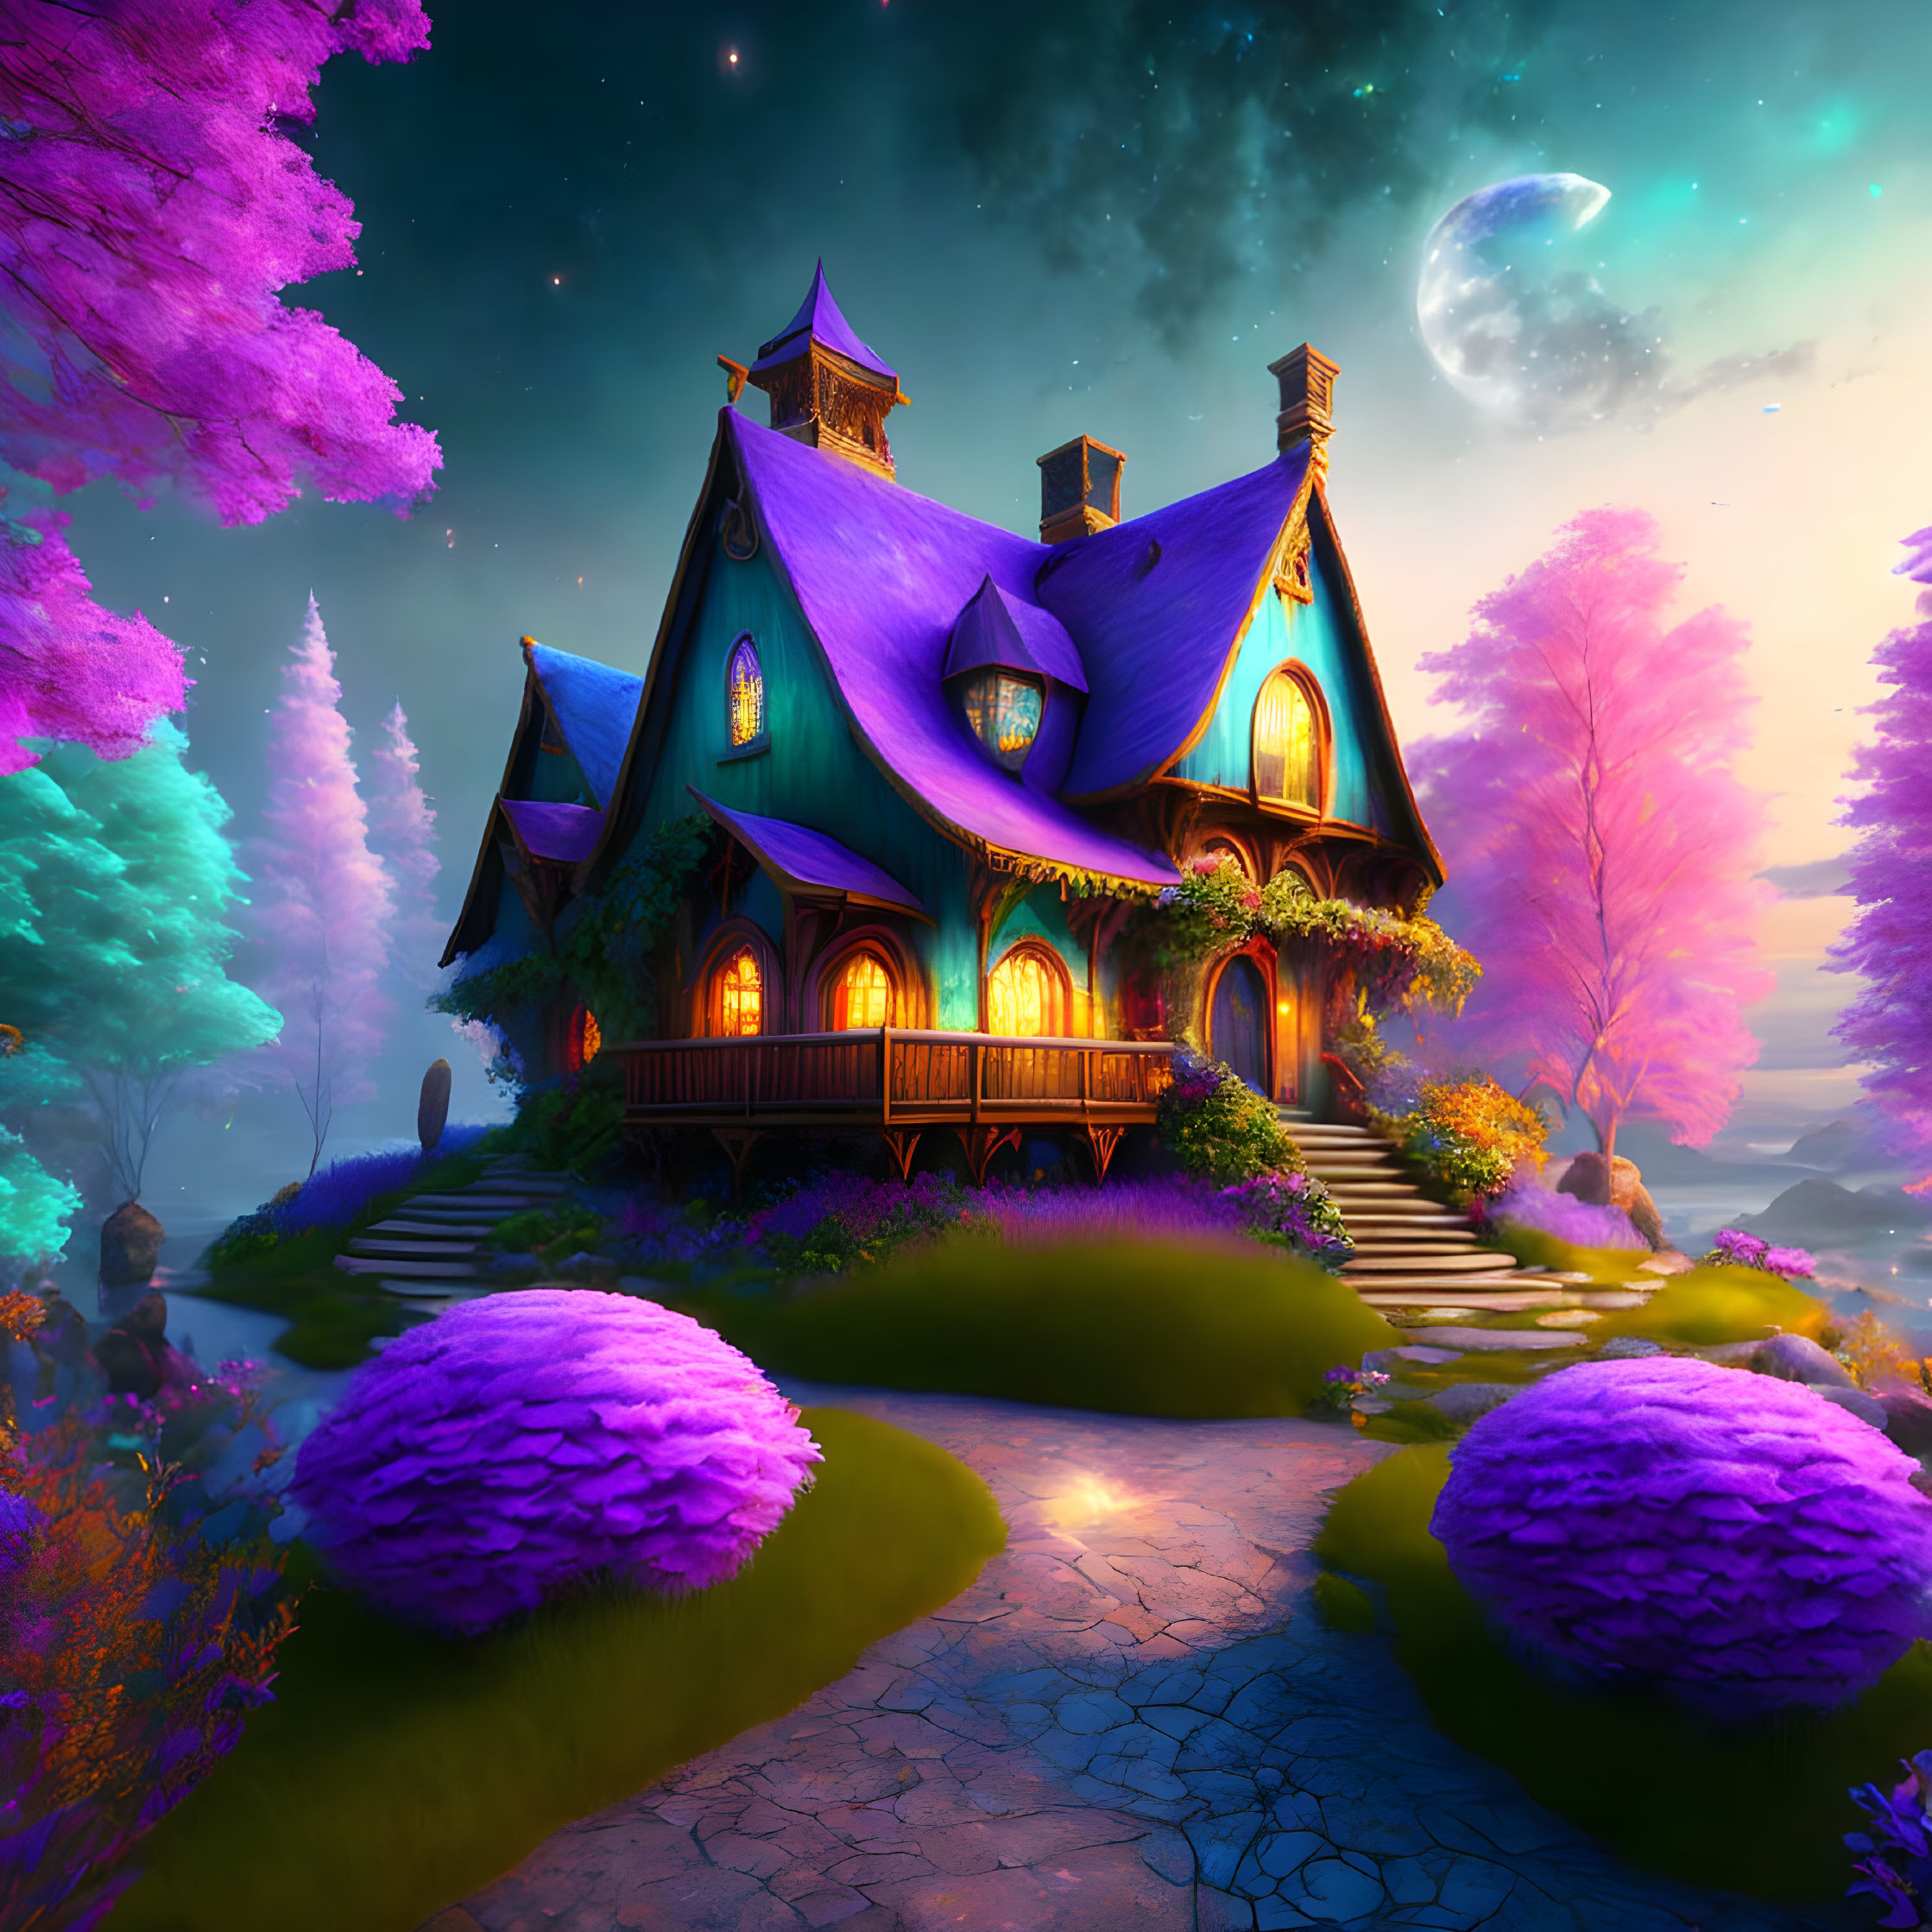 Glowing windows on enchanted house in colorful forest under starry sky